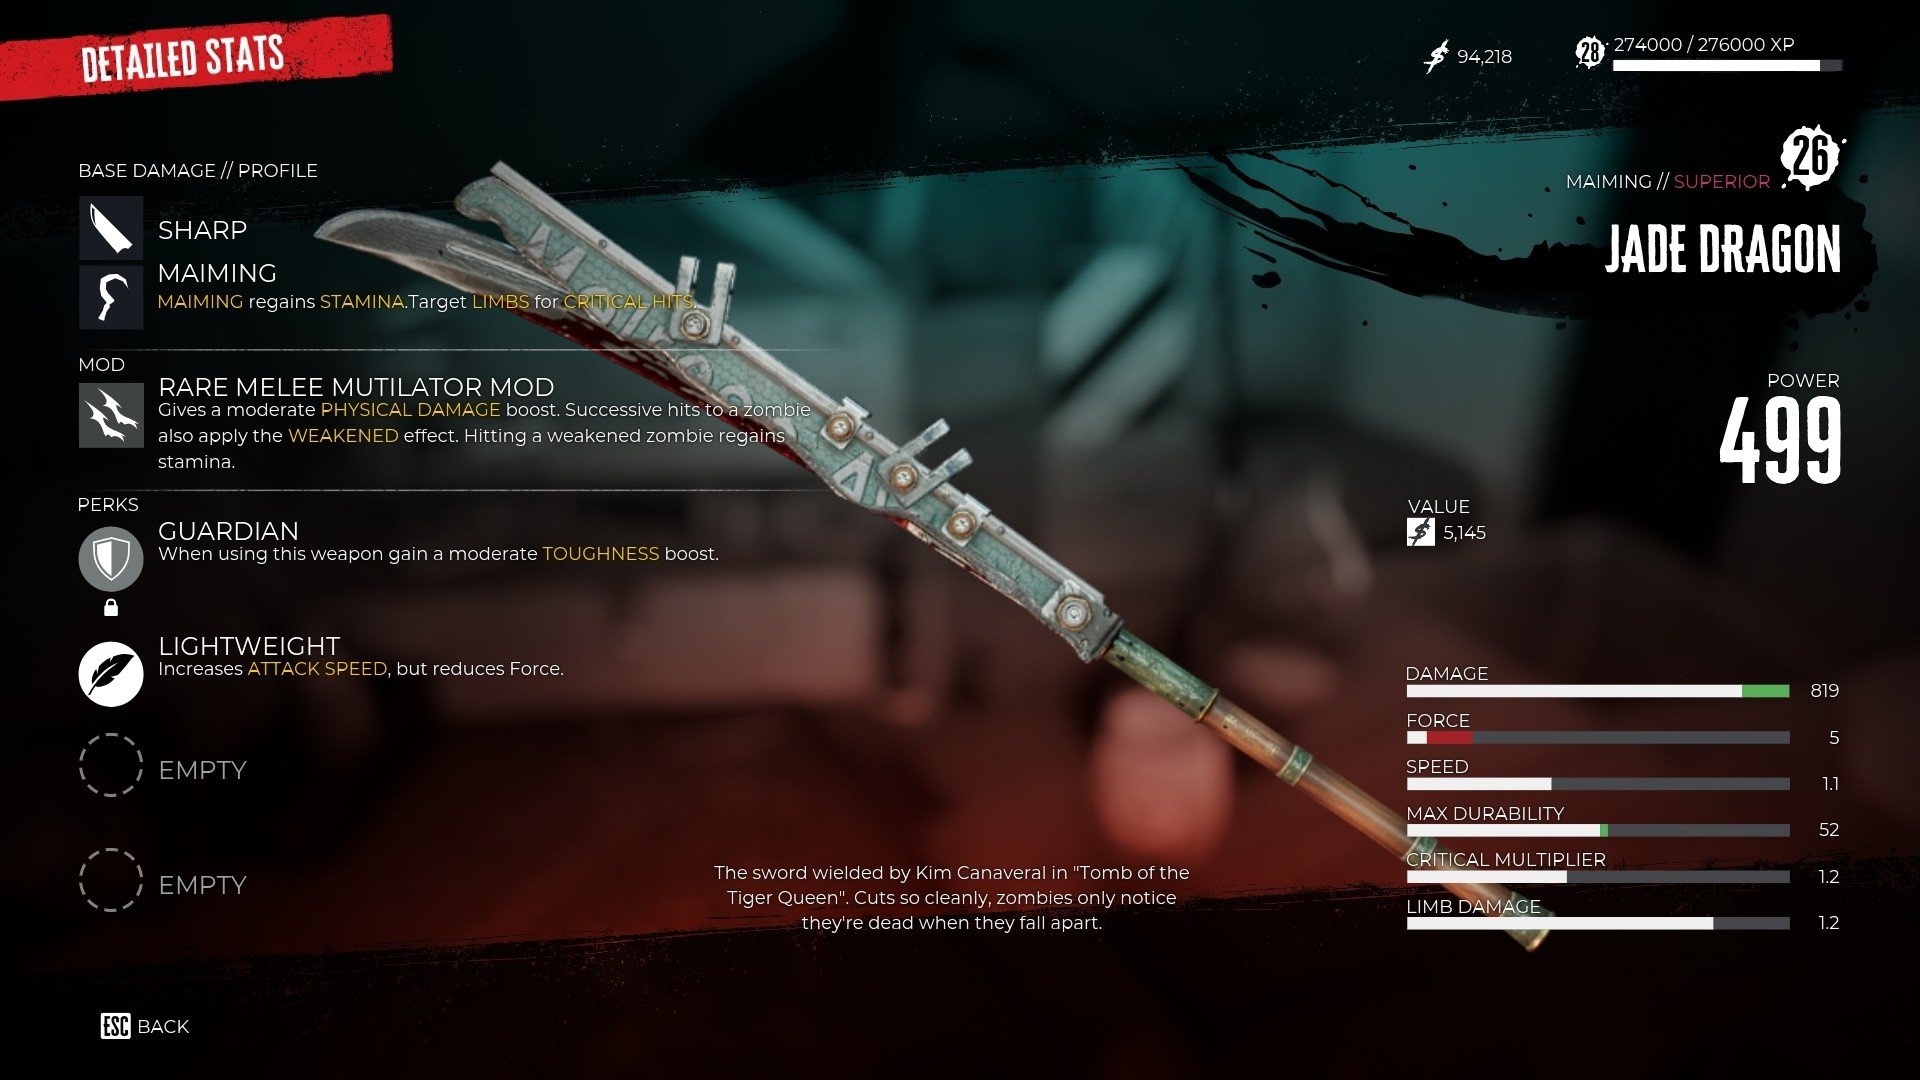 Dead Island 2 menu showing a long-handled blade in the center surrounded by boxes containing information about the blade's damage and effects